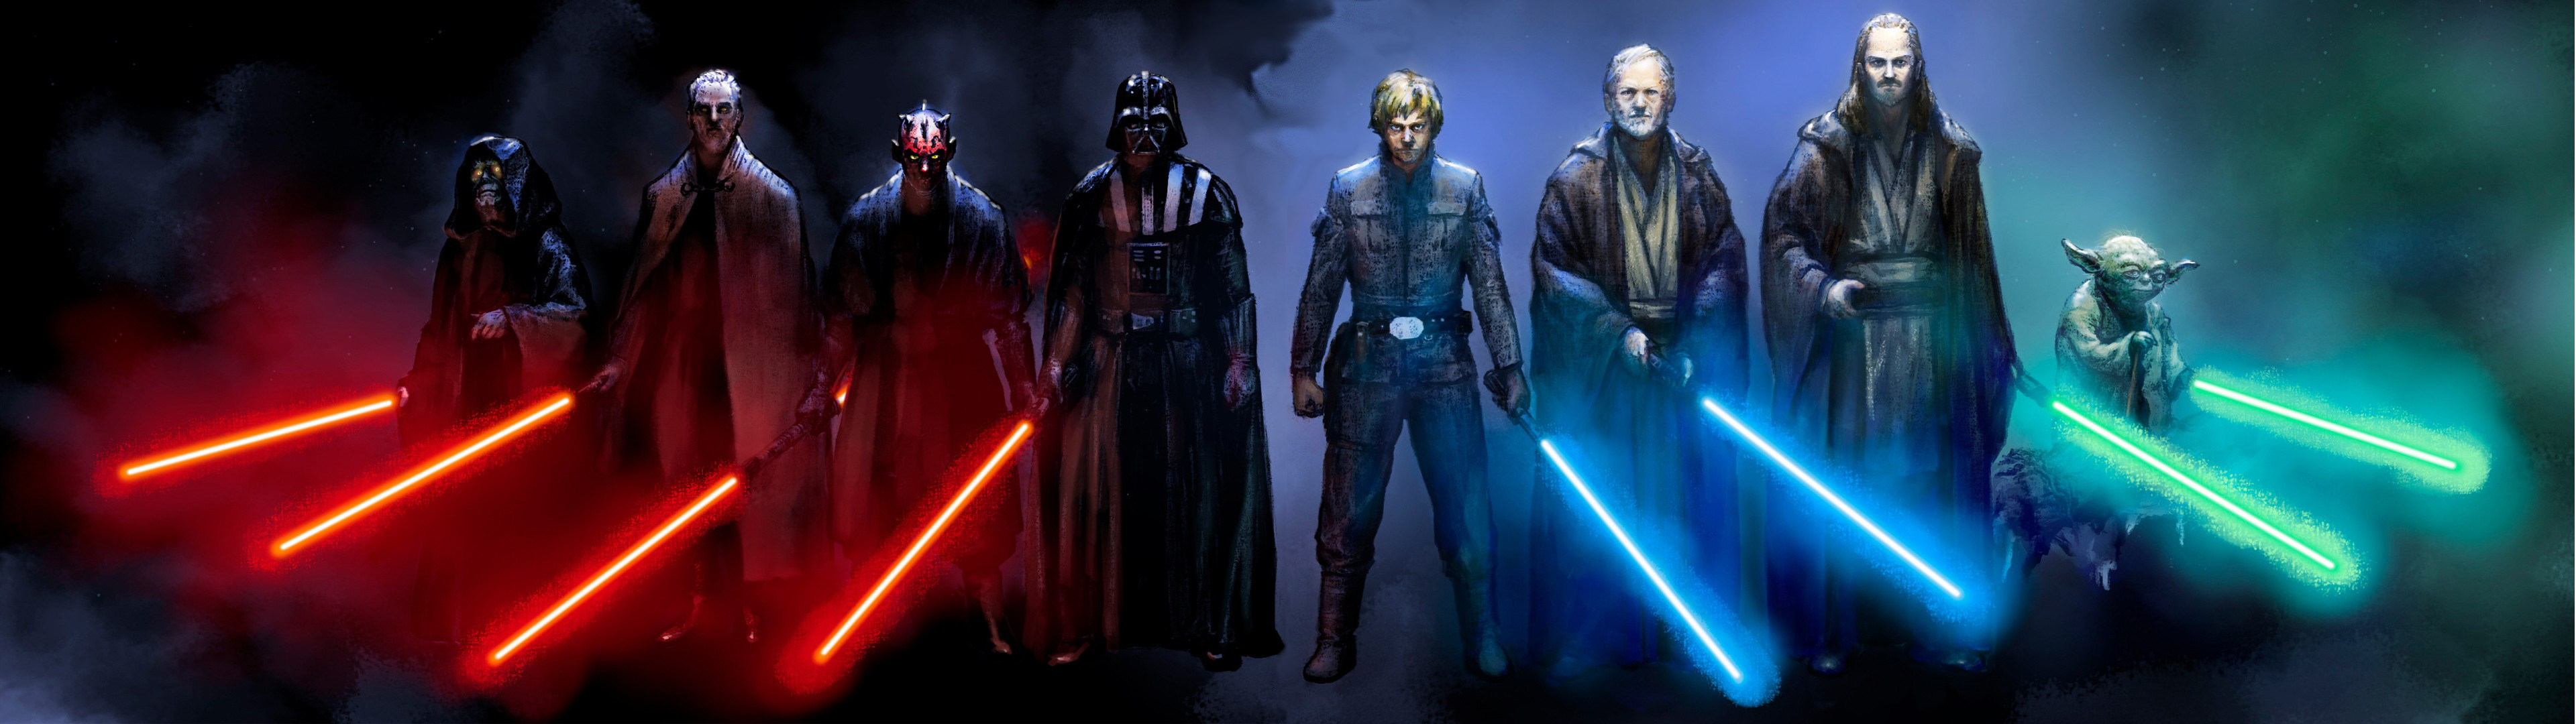 3840x1080 Here is the original version with the less powerful Sith Lords.